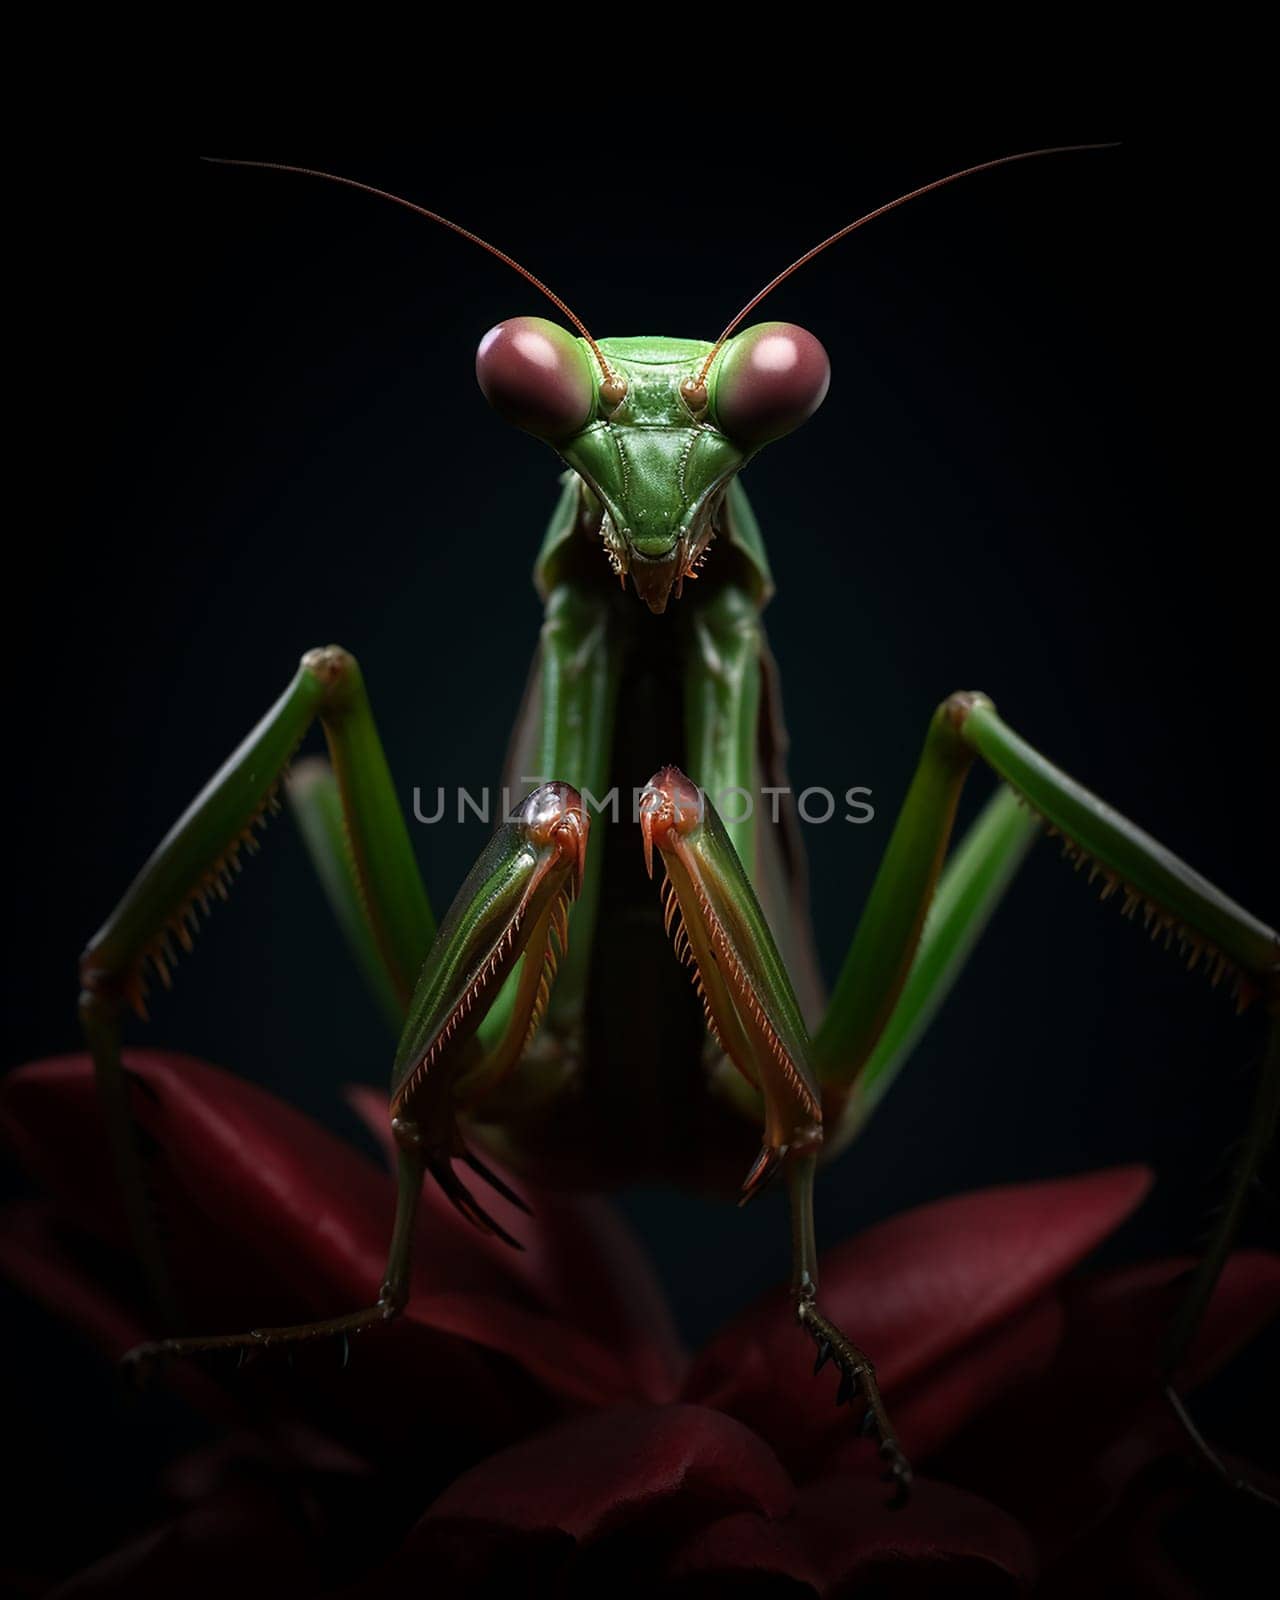 A detailed portrait of a green mantis perched on a red flower, with a black background